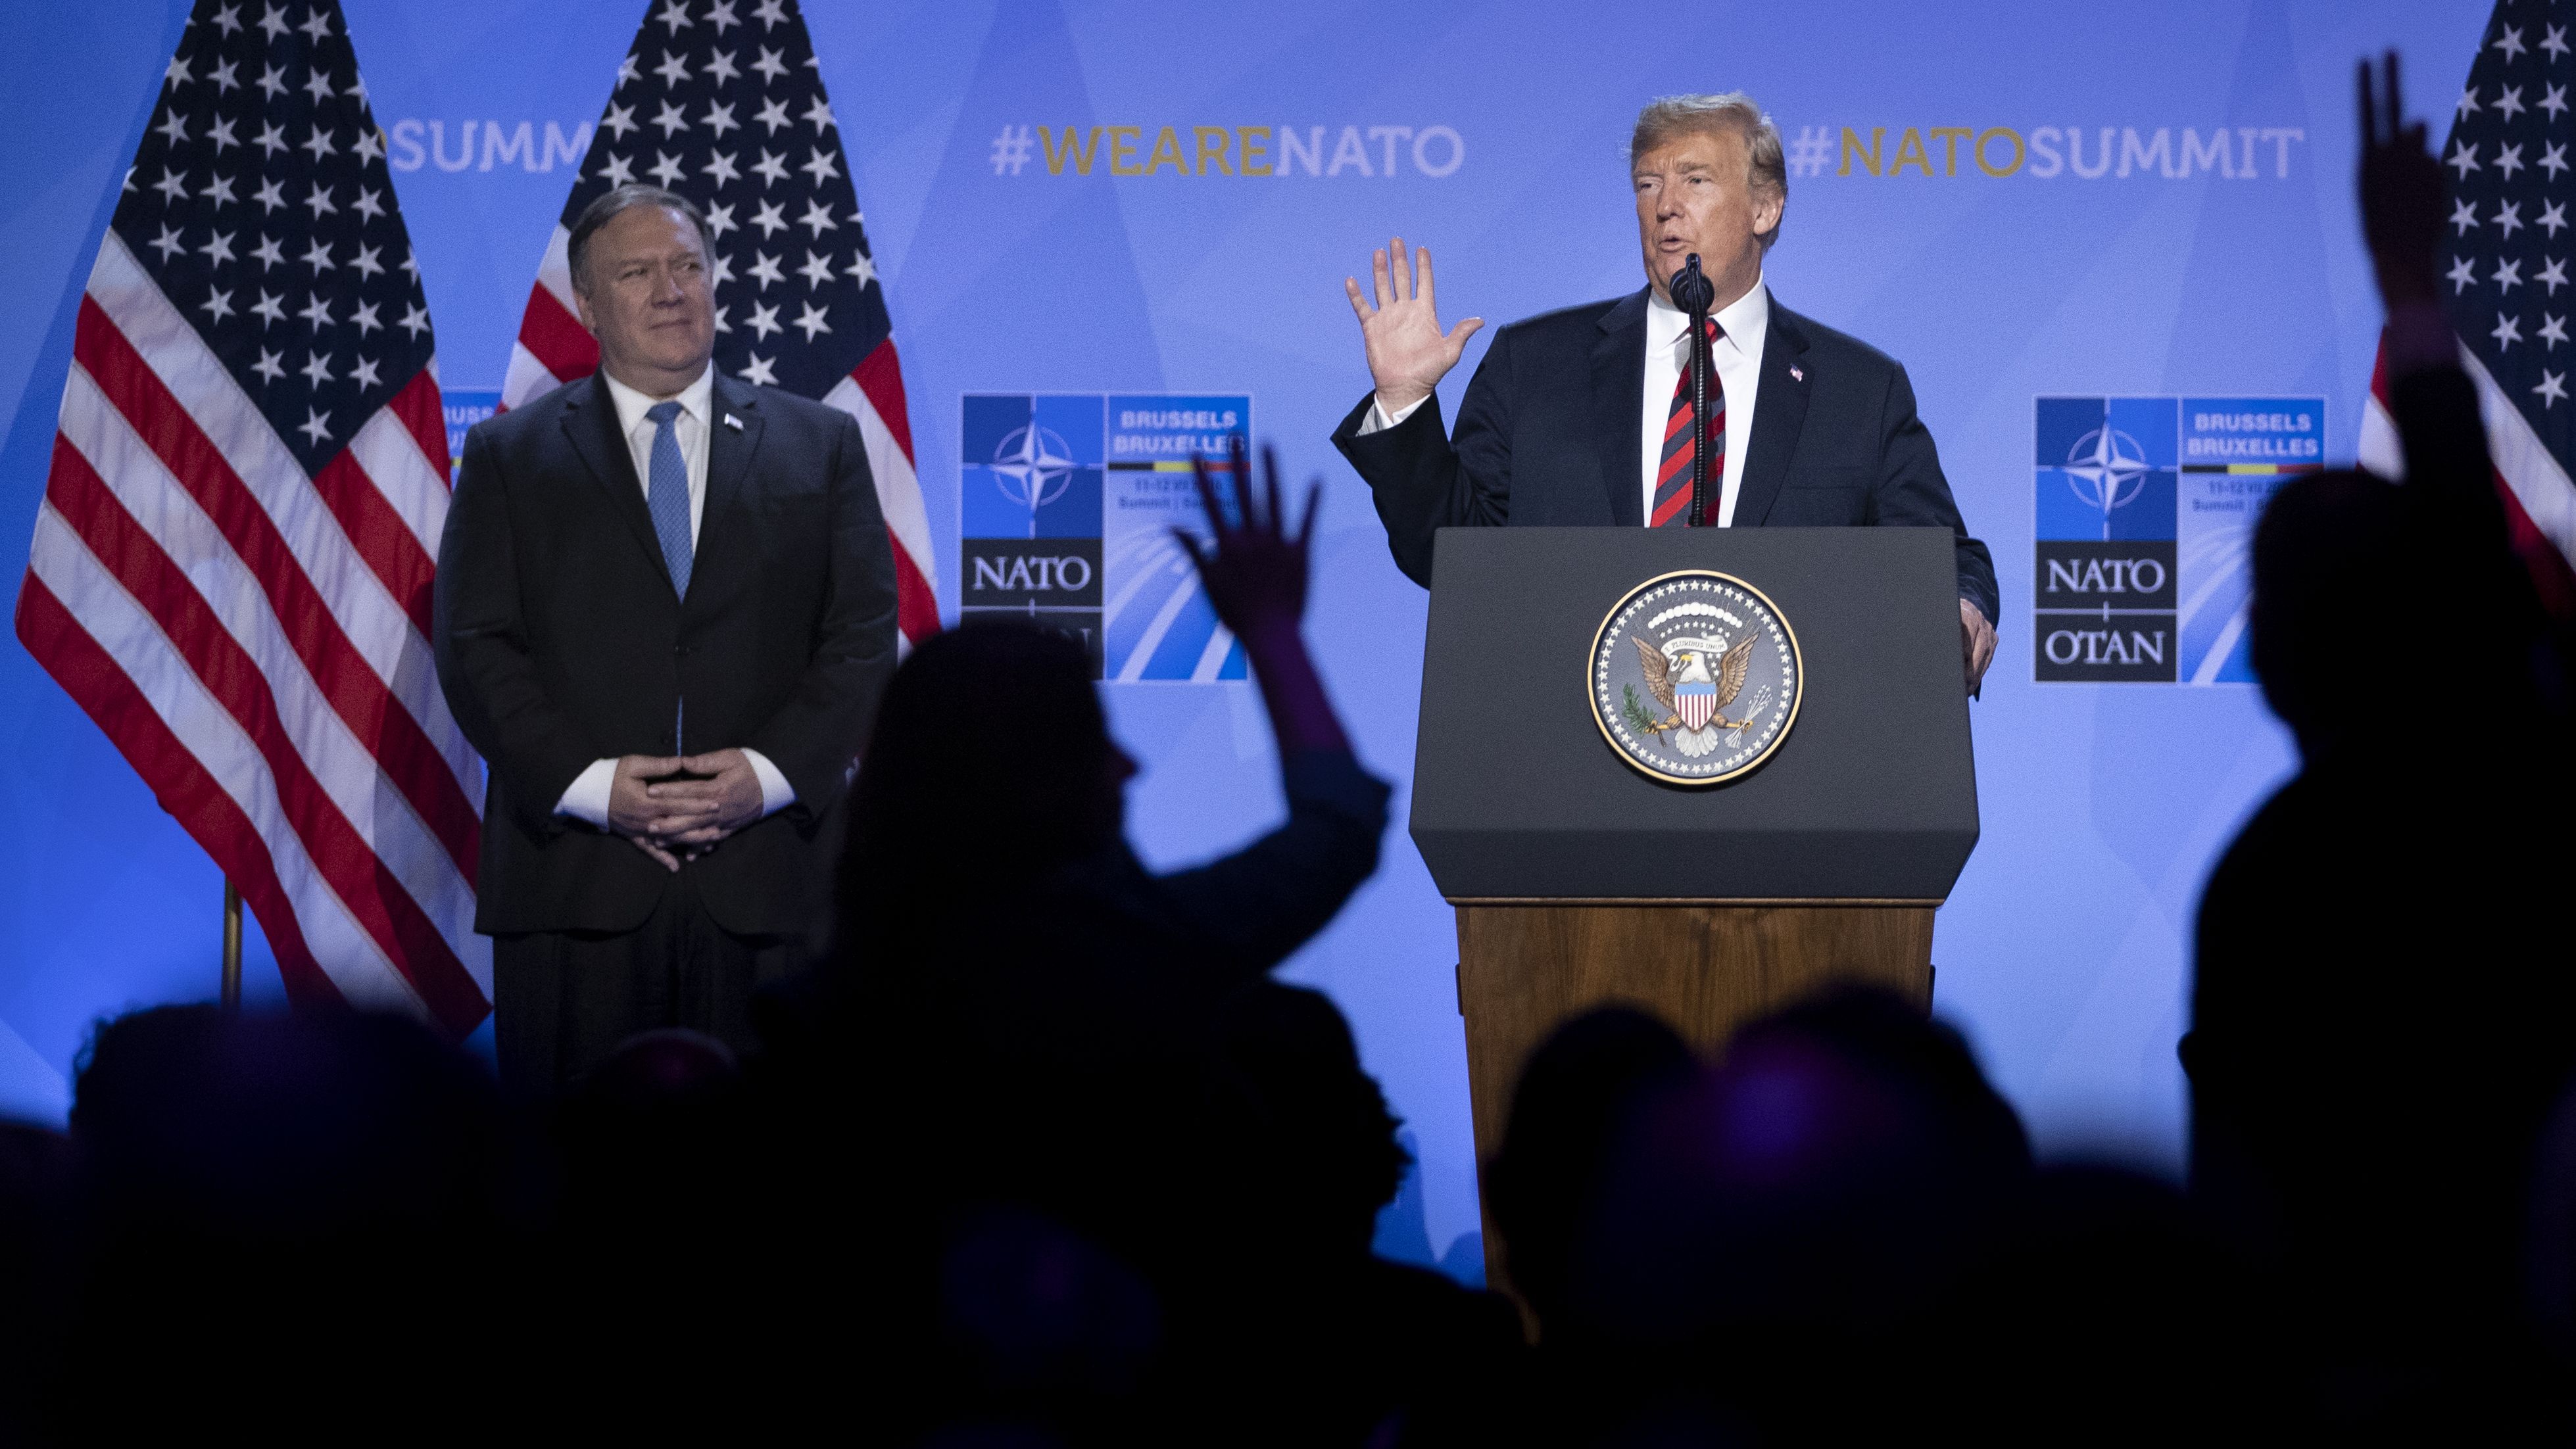 U.S. President Donald Trump gestures besides U.S. Secretary of State Mike Pompeo during a news conference at the 2018 NATO Summit at NATO headquarters on July 12, 2018 in Brussels, Belgium. 